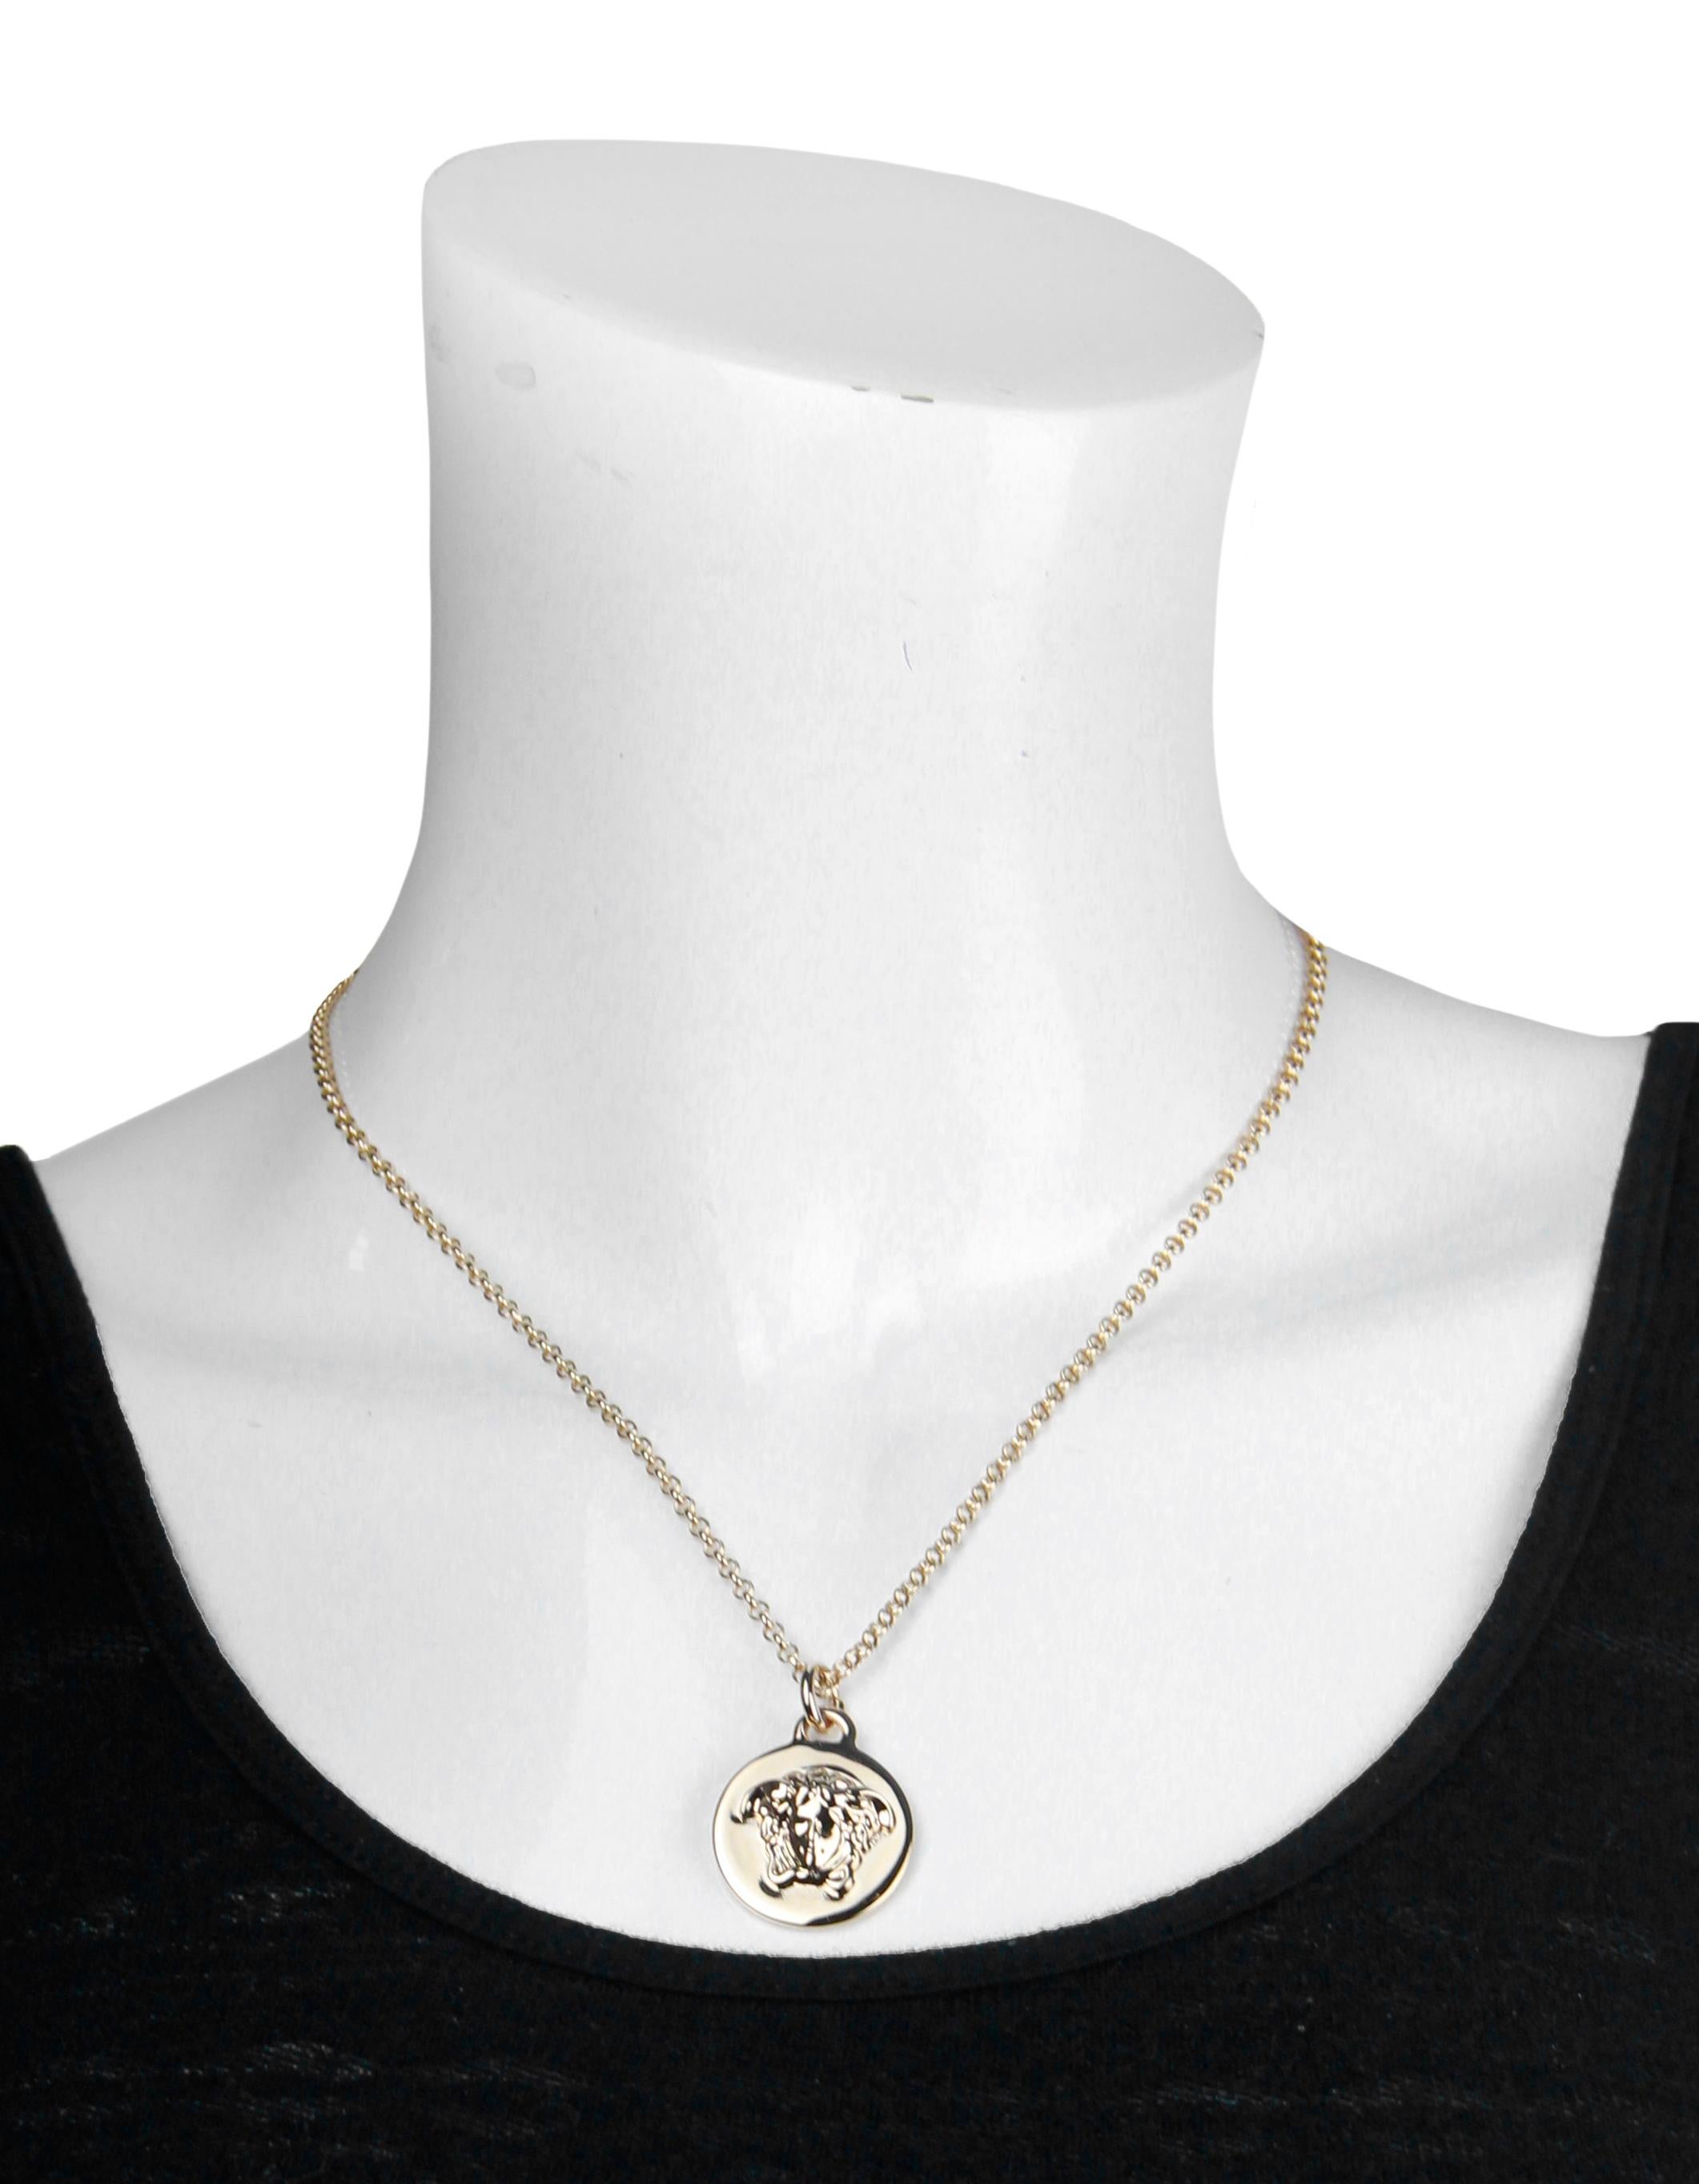 Versace NEW Goldtone Medusa Head Pendant Necklace
Materials: Goldtone metal
Hallmarks: VERSACE MADE IN ITALY
Oening: Lobster clasp with adjustable chain
Overall Condition: Excellent with very light surface scratching to back of pendant
Includes: